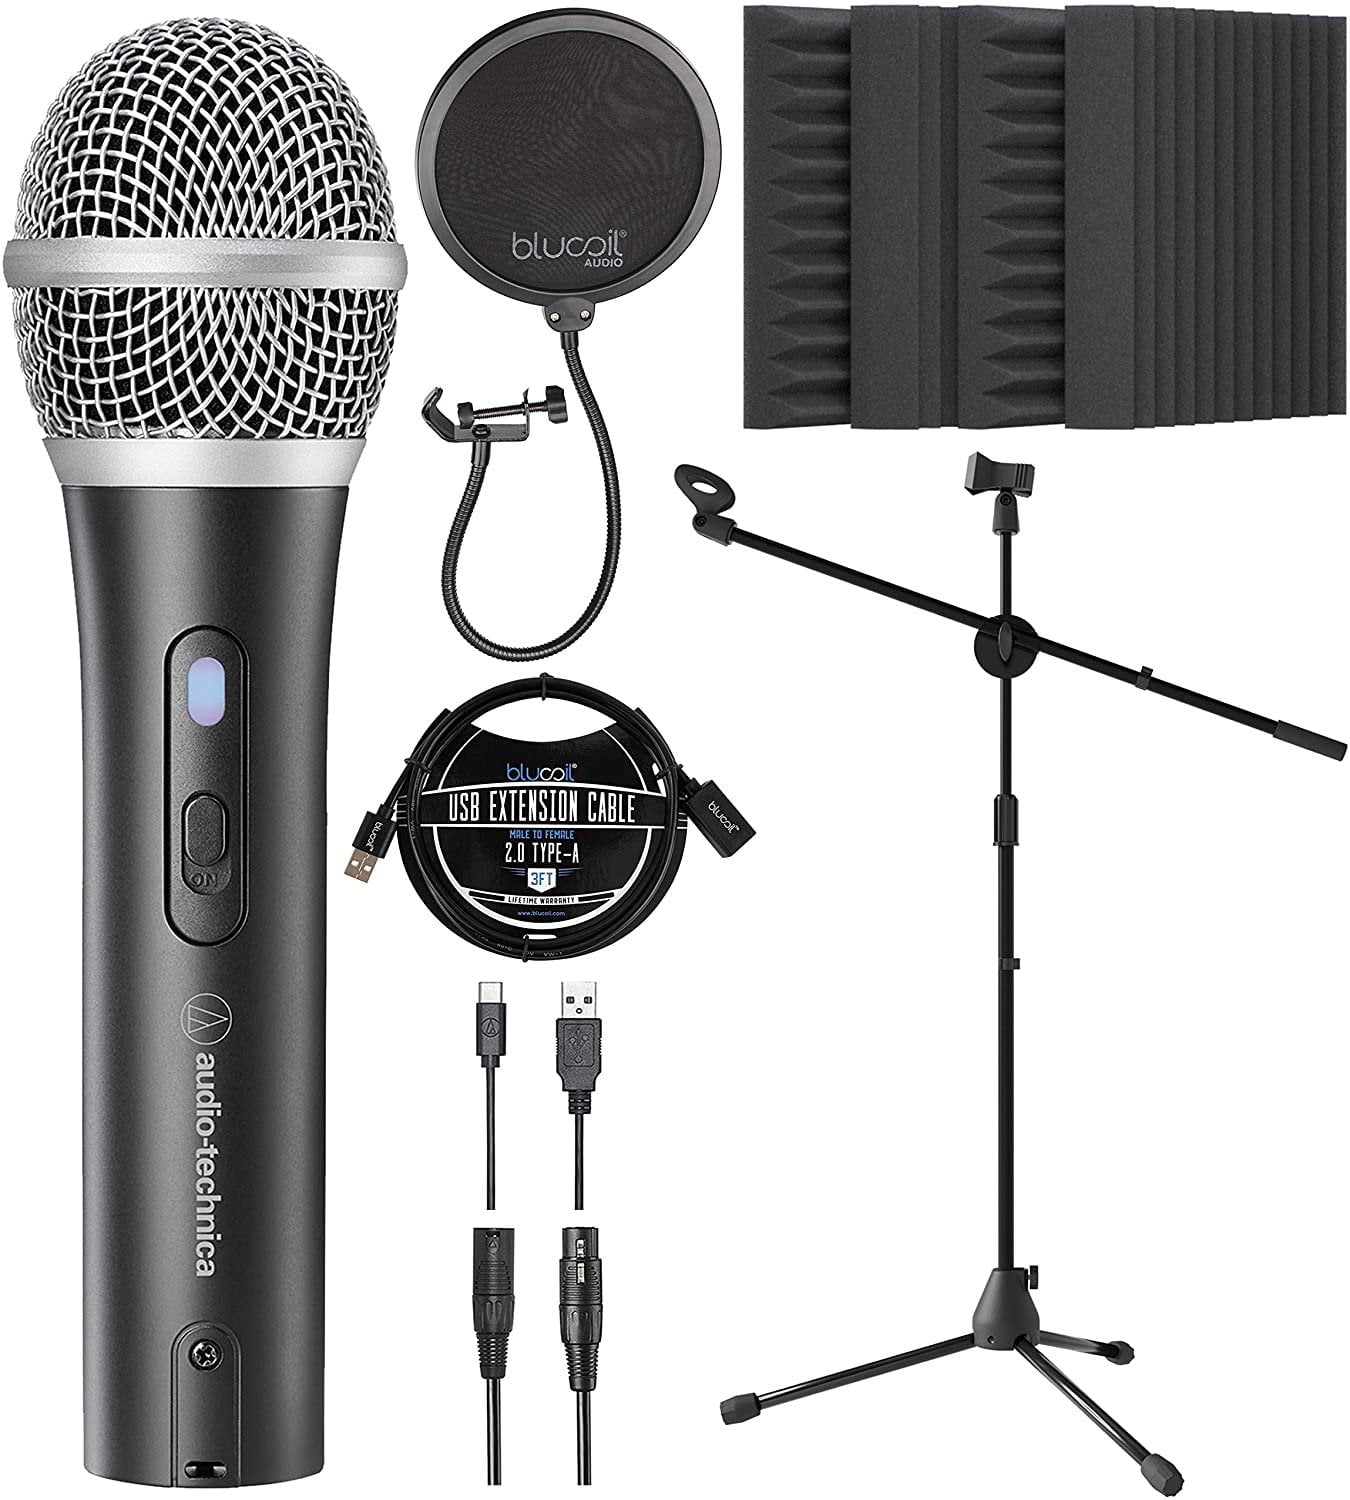 Boom Arm Plus Pop Filter USB-A Mini Hub Audio-Technica ATR2100X-USB Cardioid Dynamic Microphone for Windows and Mac Bundle with Blucoil 1080p USB Webcam and 3-FT USB 2.0 Type-A Extension Cable 